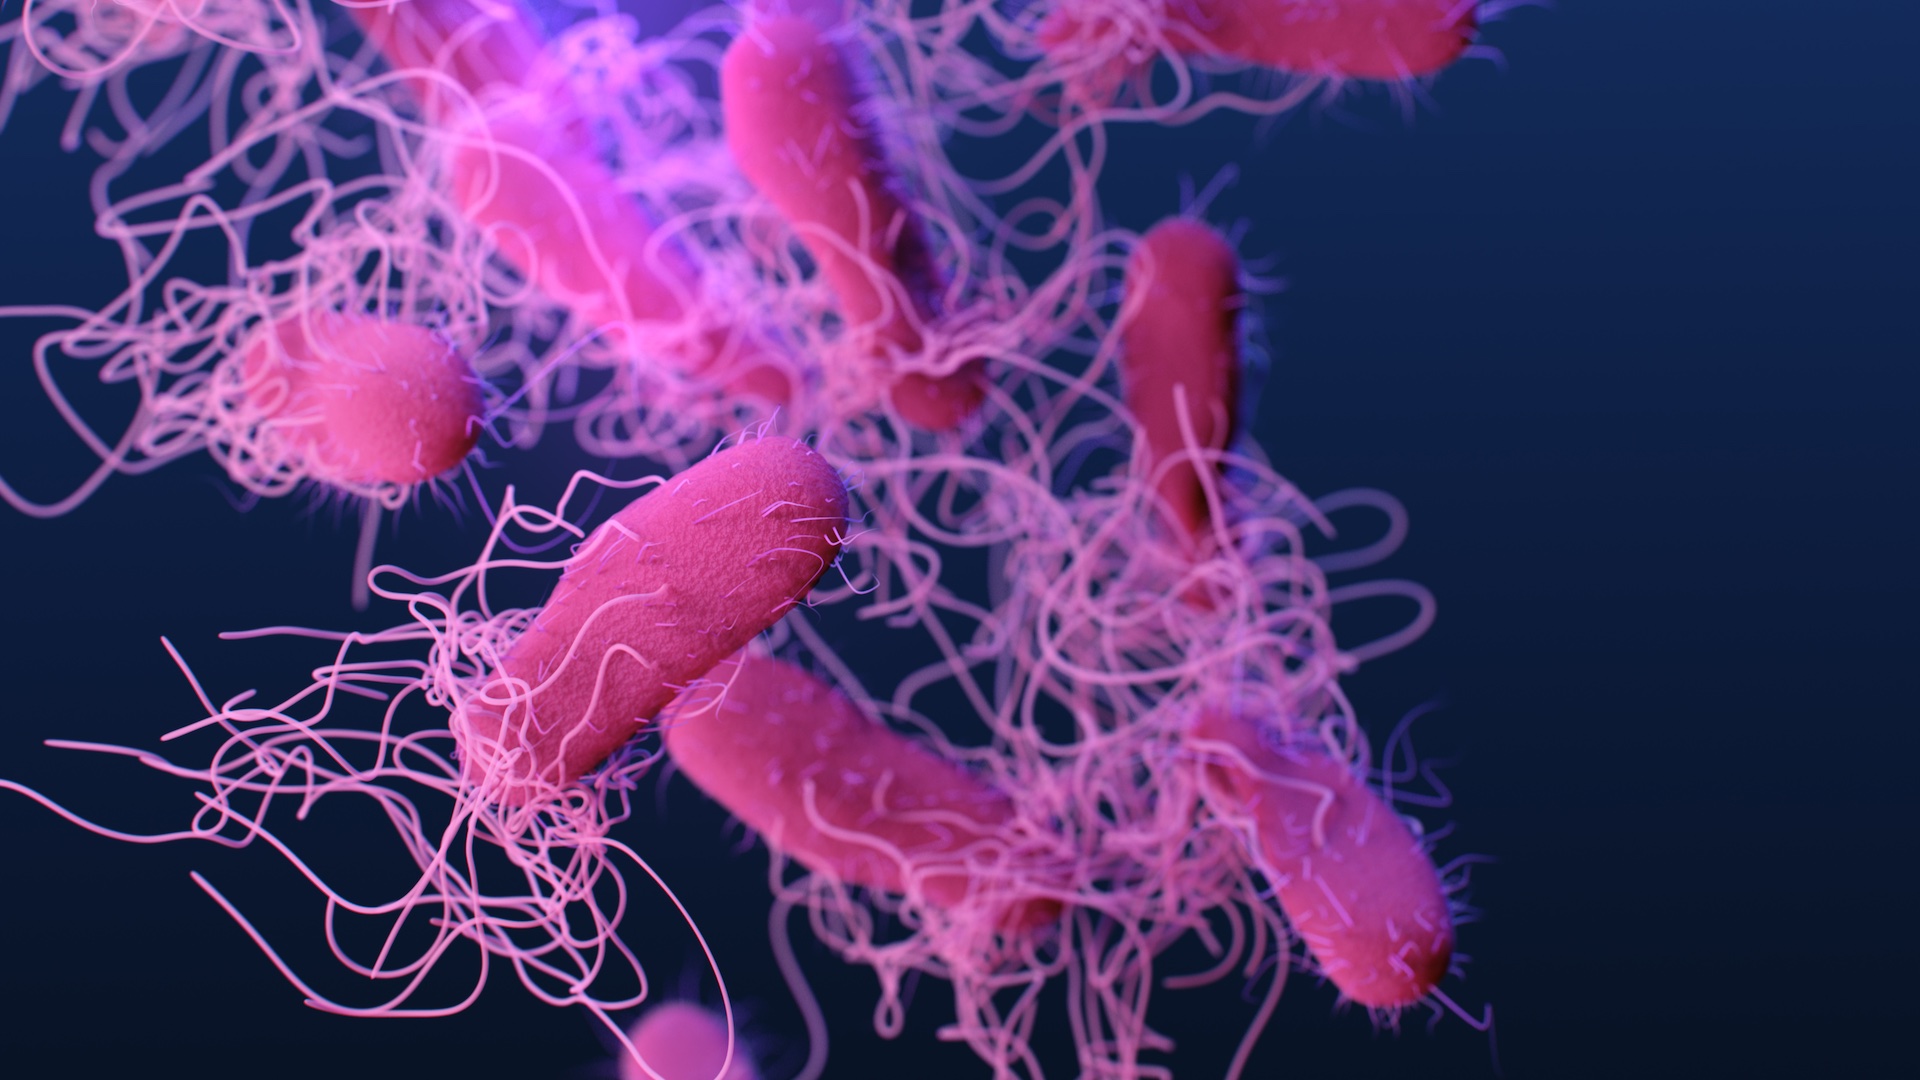 This is a medical illustration of drug-resistant, nontyphoidal, Salmonella sp. bacteria